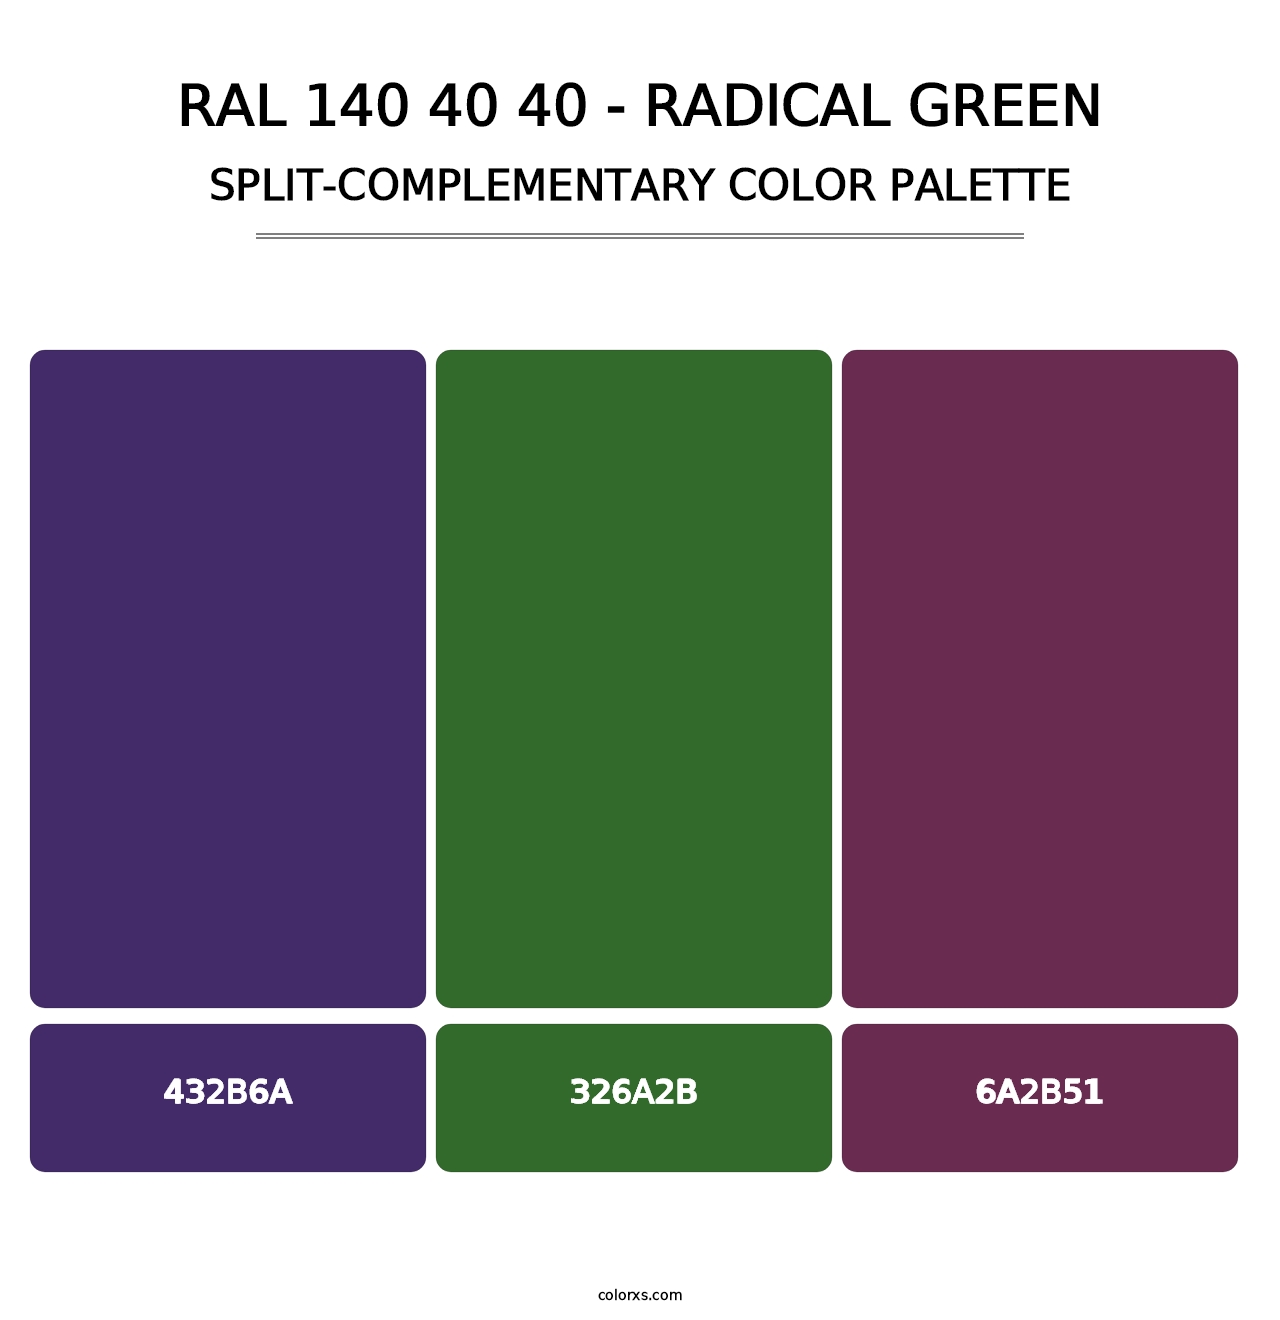 RAL 140 40 40 - Radical Green - Split-Complementary Color Palette